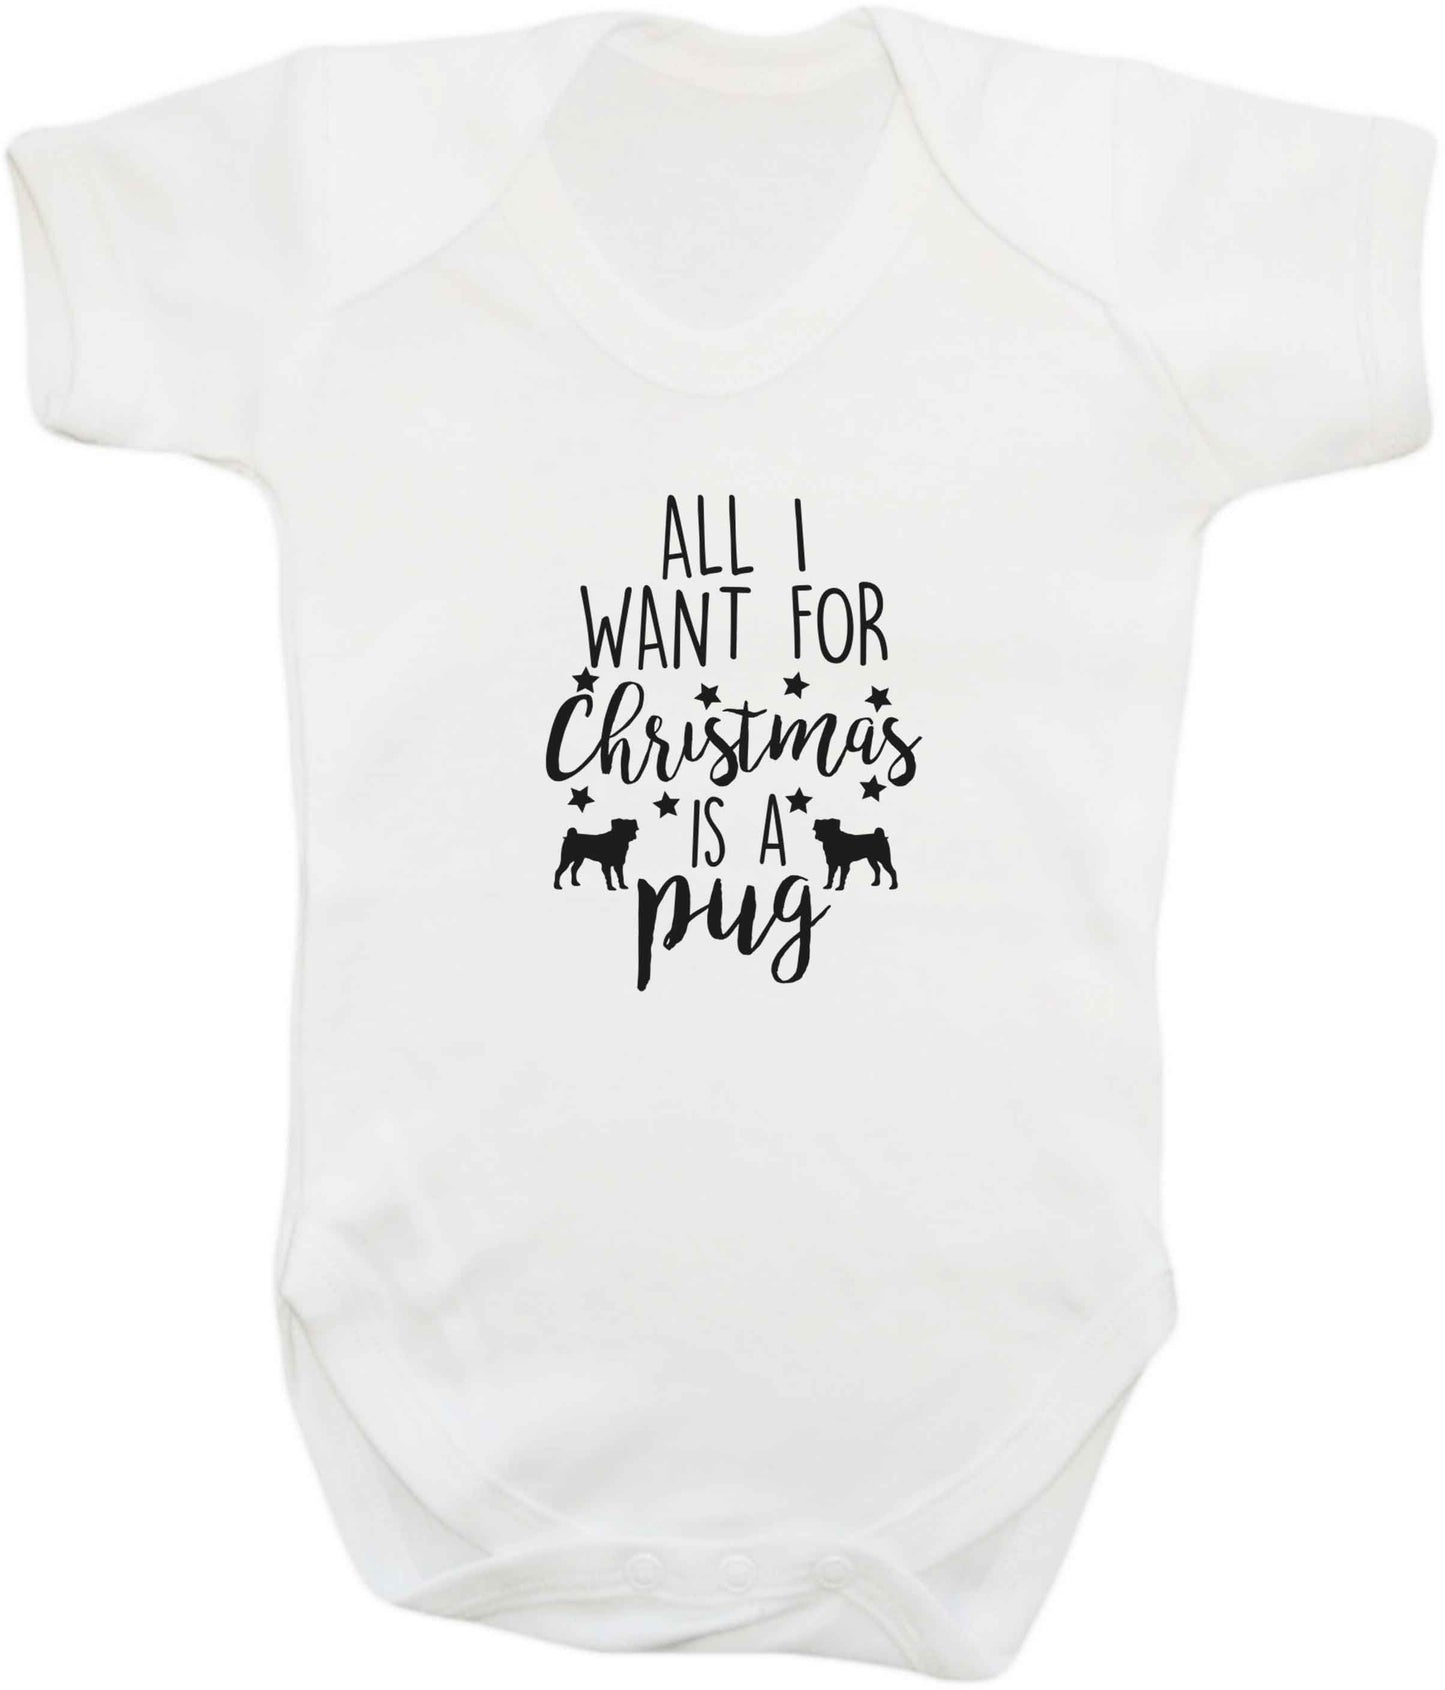 All I want for Christmas is a pug baby vest white 18-24 months